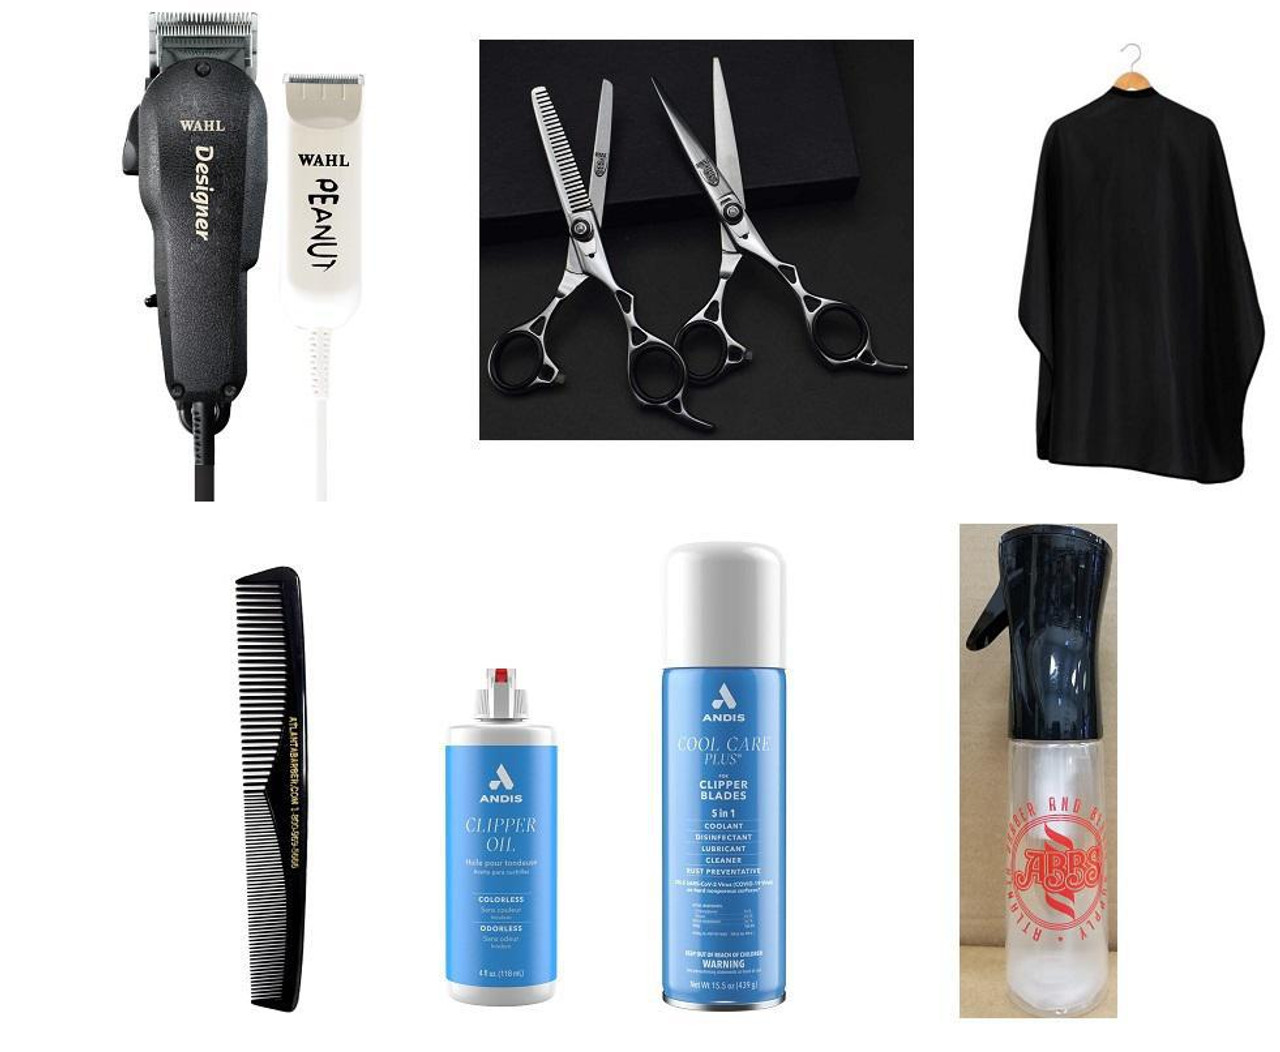 All In One Kit - Wahl All Star Clippers